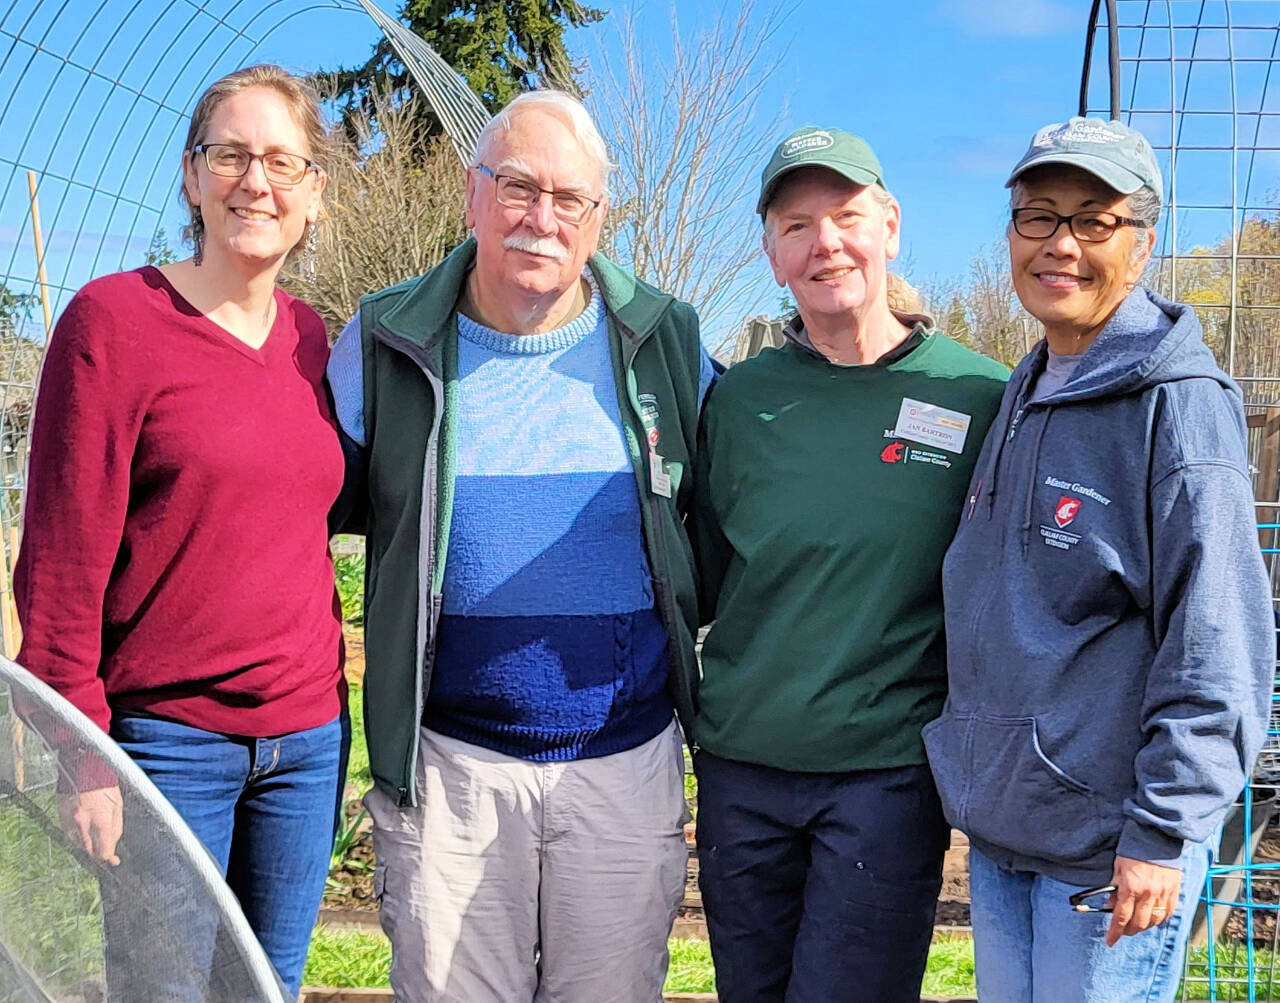 Photo courtesy of Clallam County Master Gardeners / WSU-certified Clallam County Master Gardeners (from left) Laurel Moulton, Bob Cain, Jan Bartron and Audreen Williams lead an educational walk through the Fifth Street Community Garden, from 10-11:30 a.m. on Saturday, April 13.